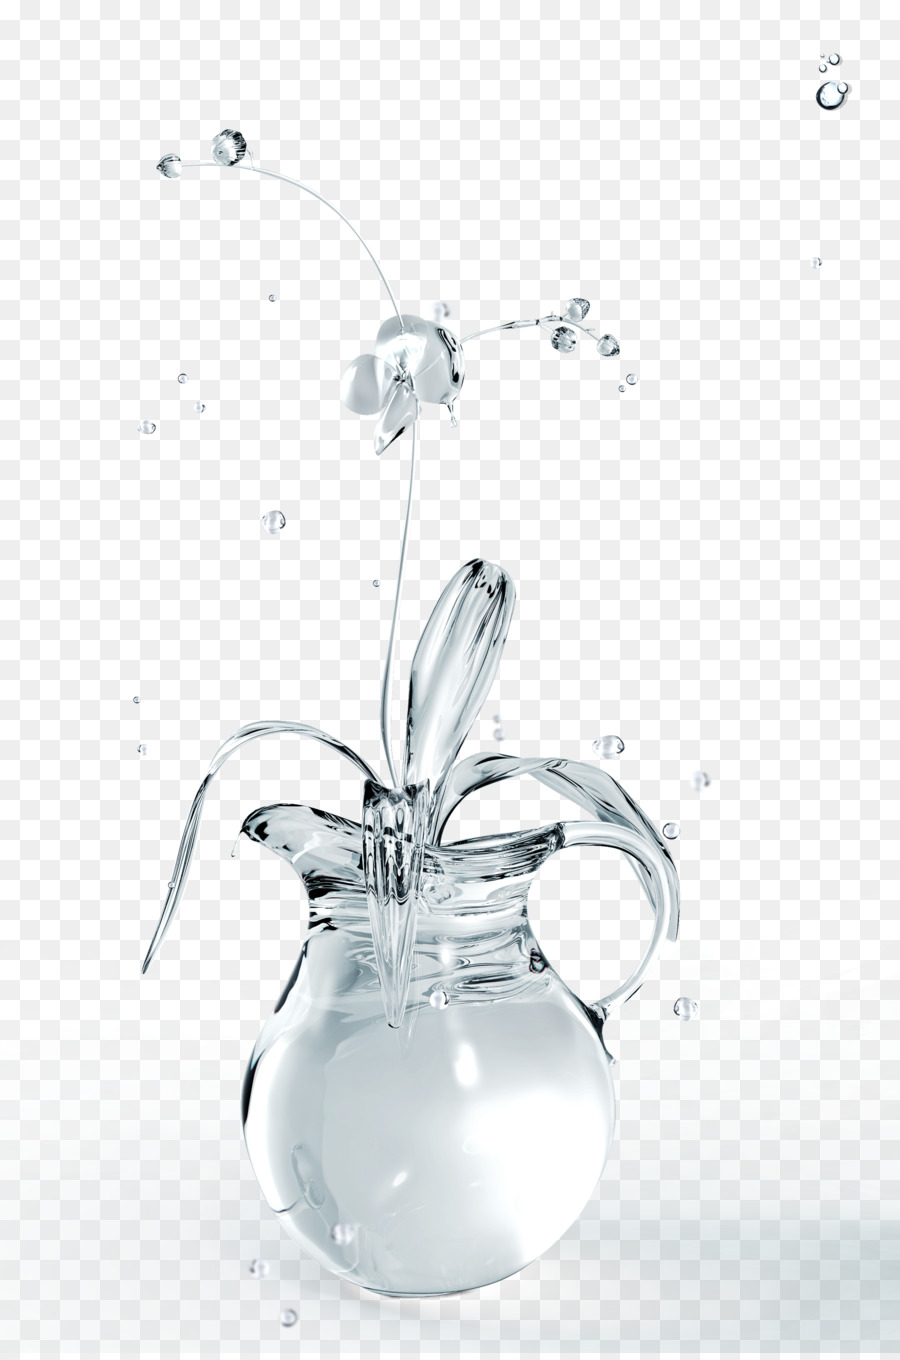 Glass Transparency and translucency Flower - Creative Glass Vase png download - 3458*5200 - Free Transparent Glass png Download.